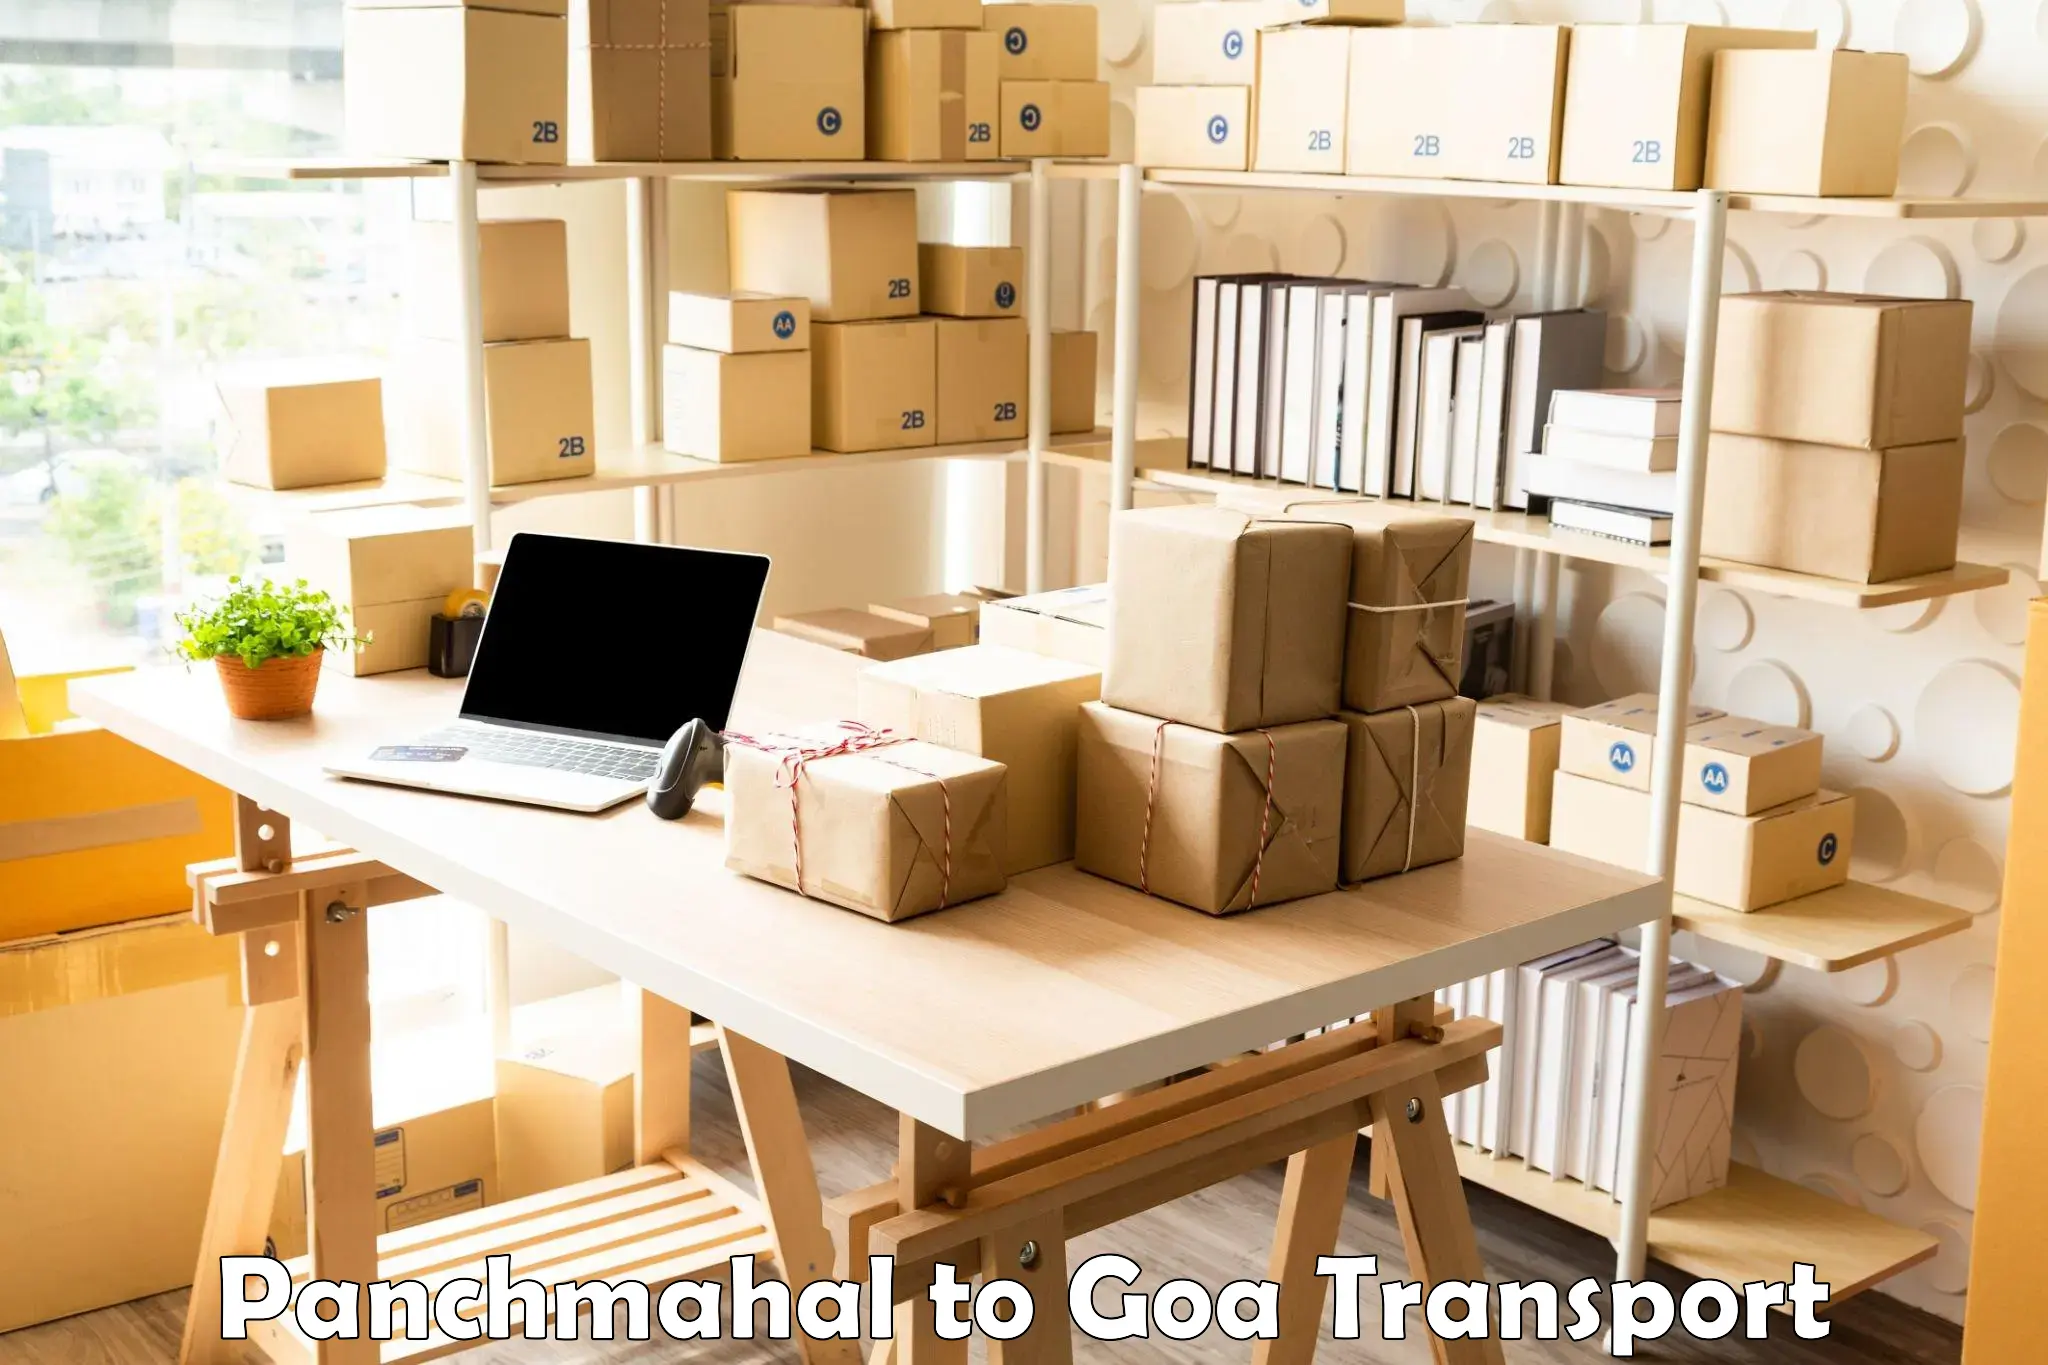 Vehicle transport services Panchmahal to Goa